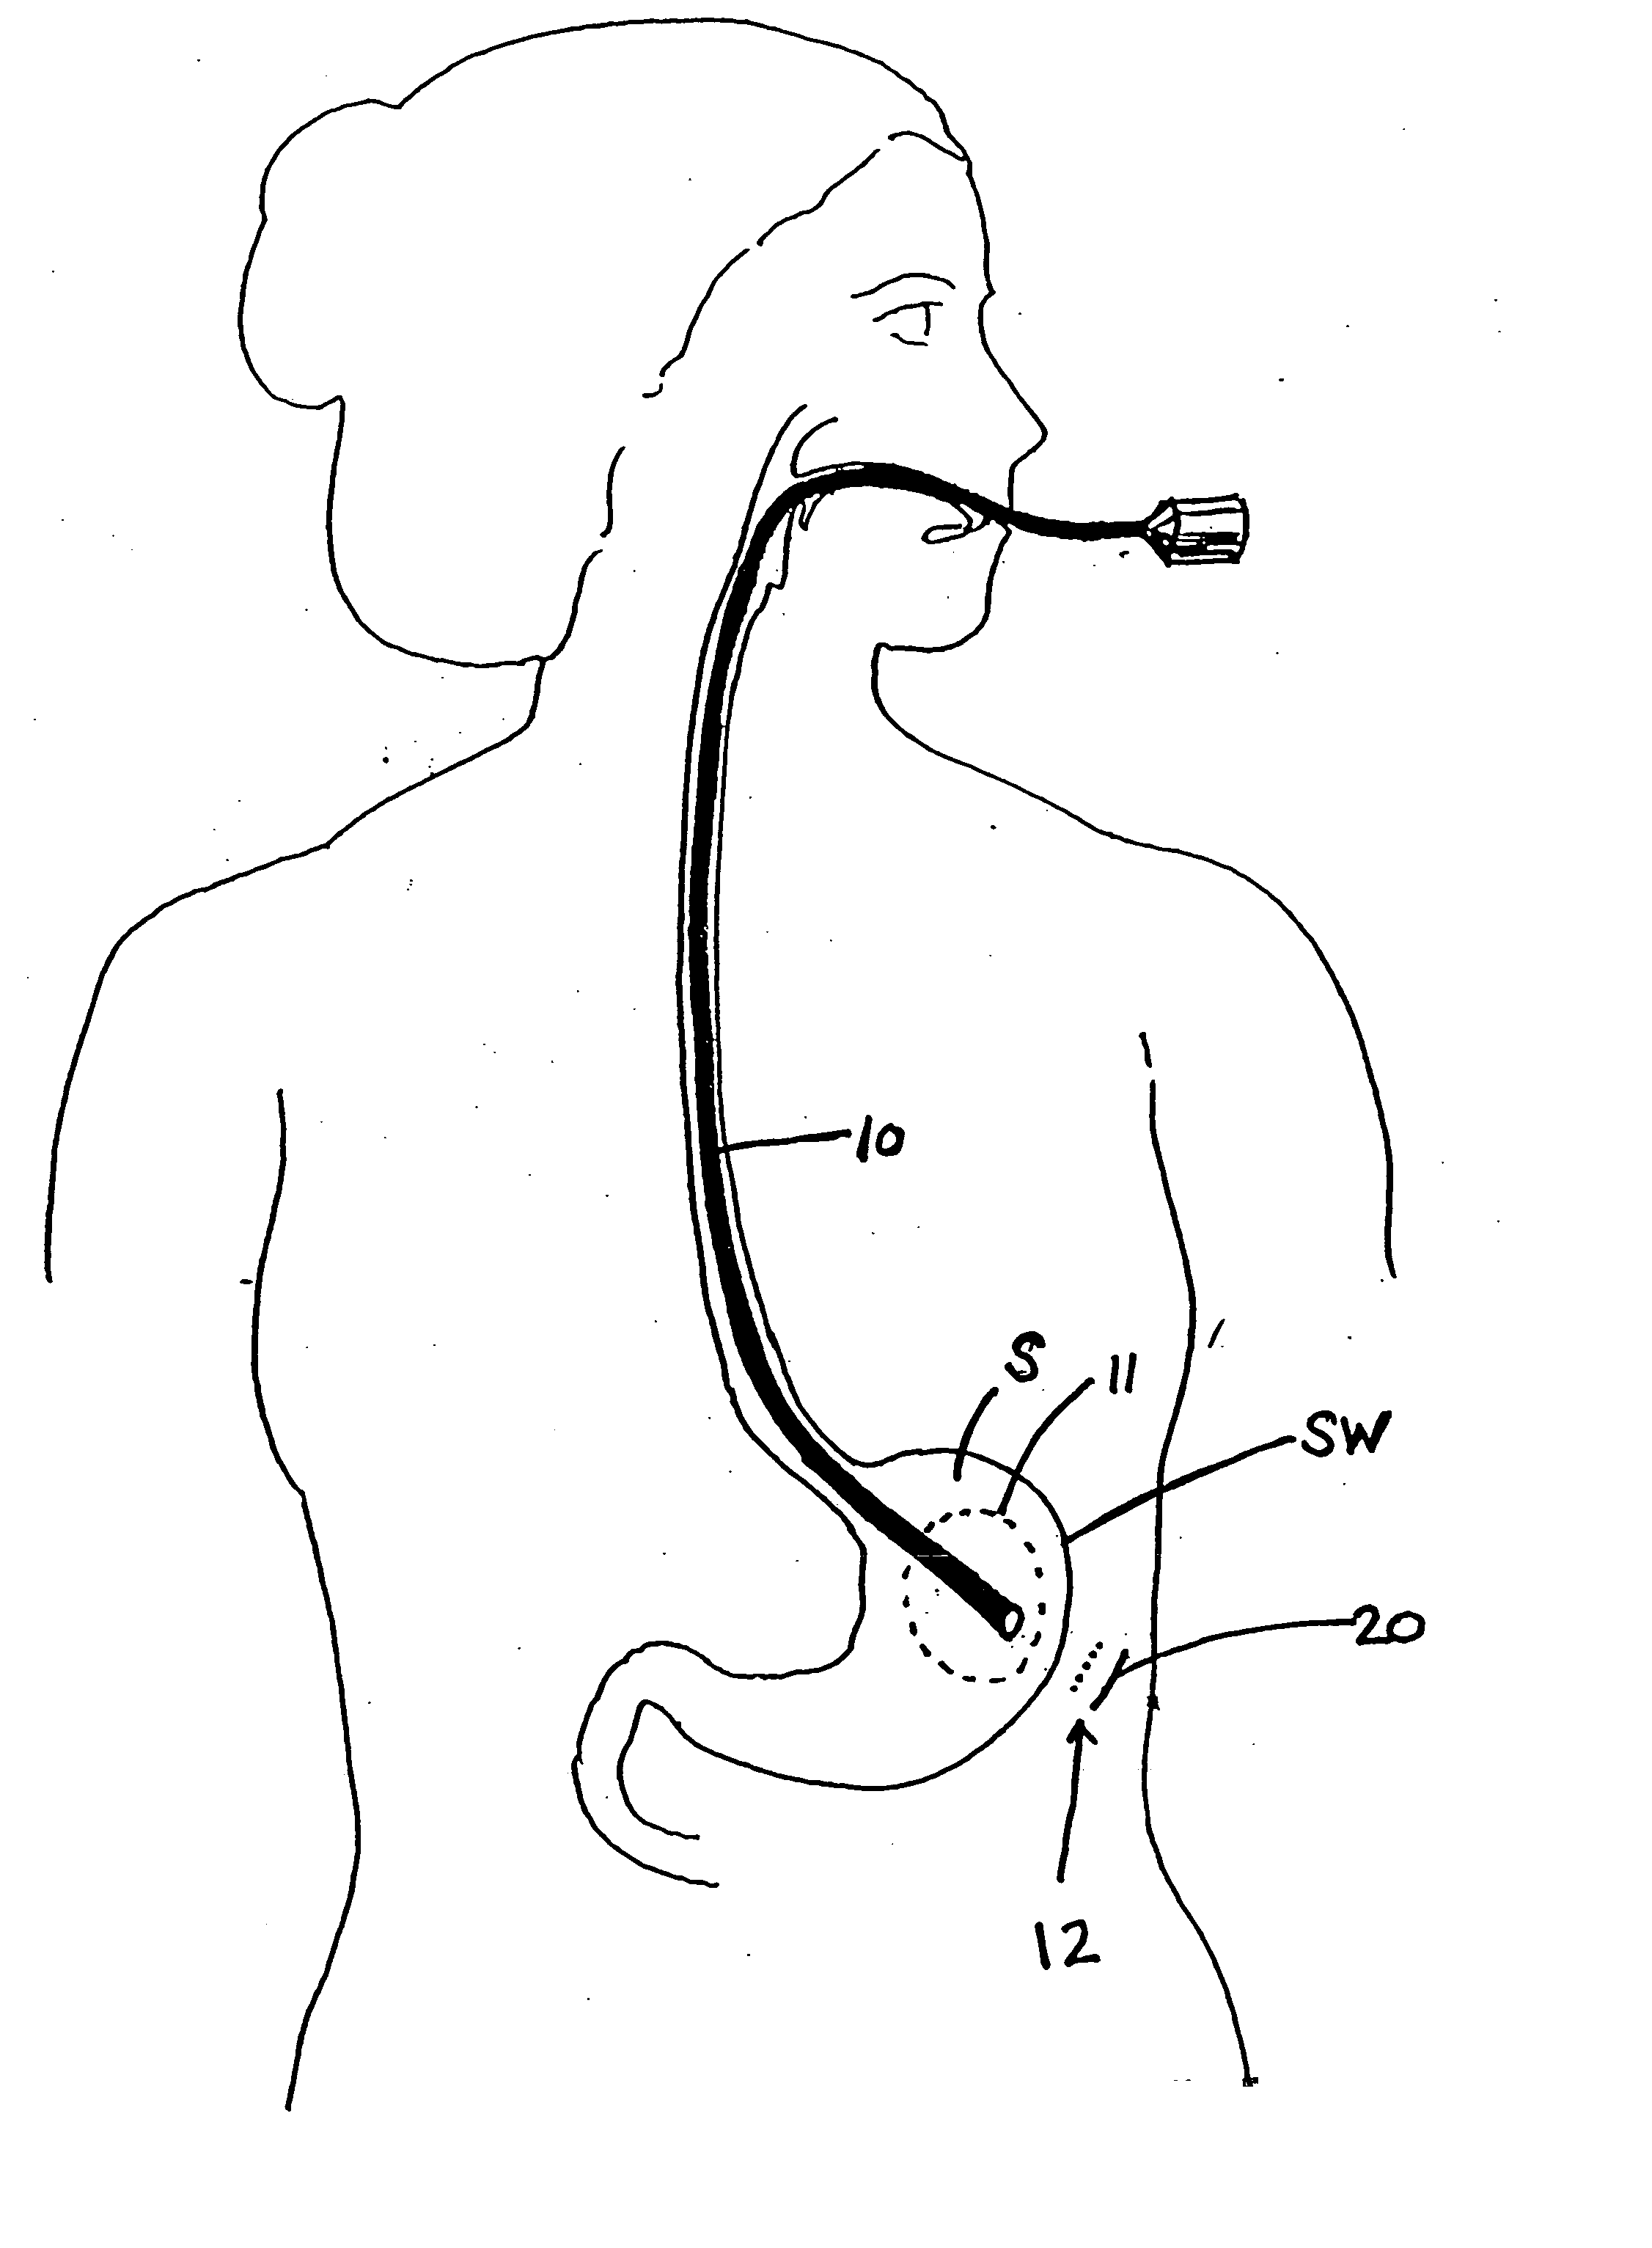 Method and device for use in minimally invasive placement of intragastric devices